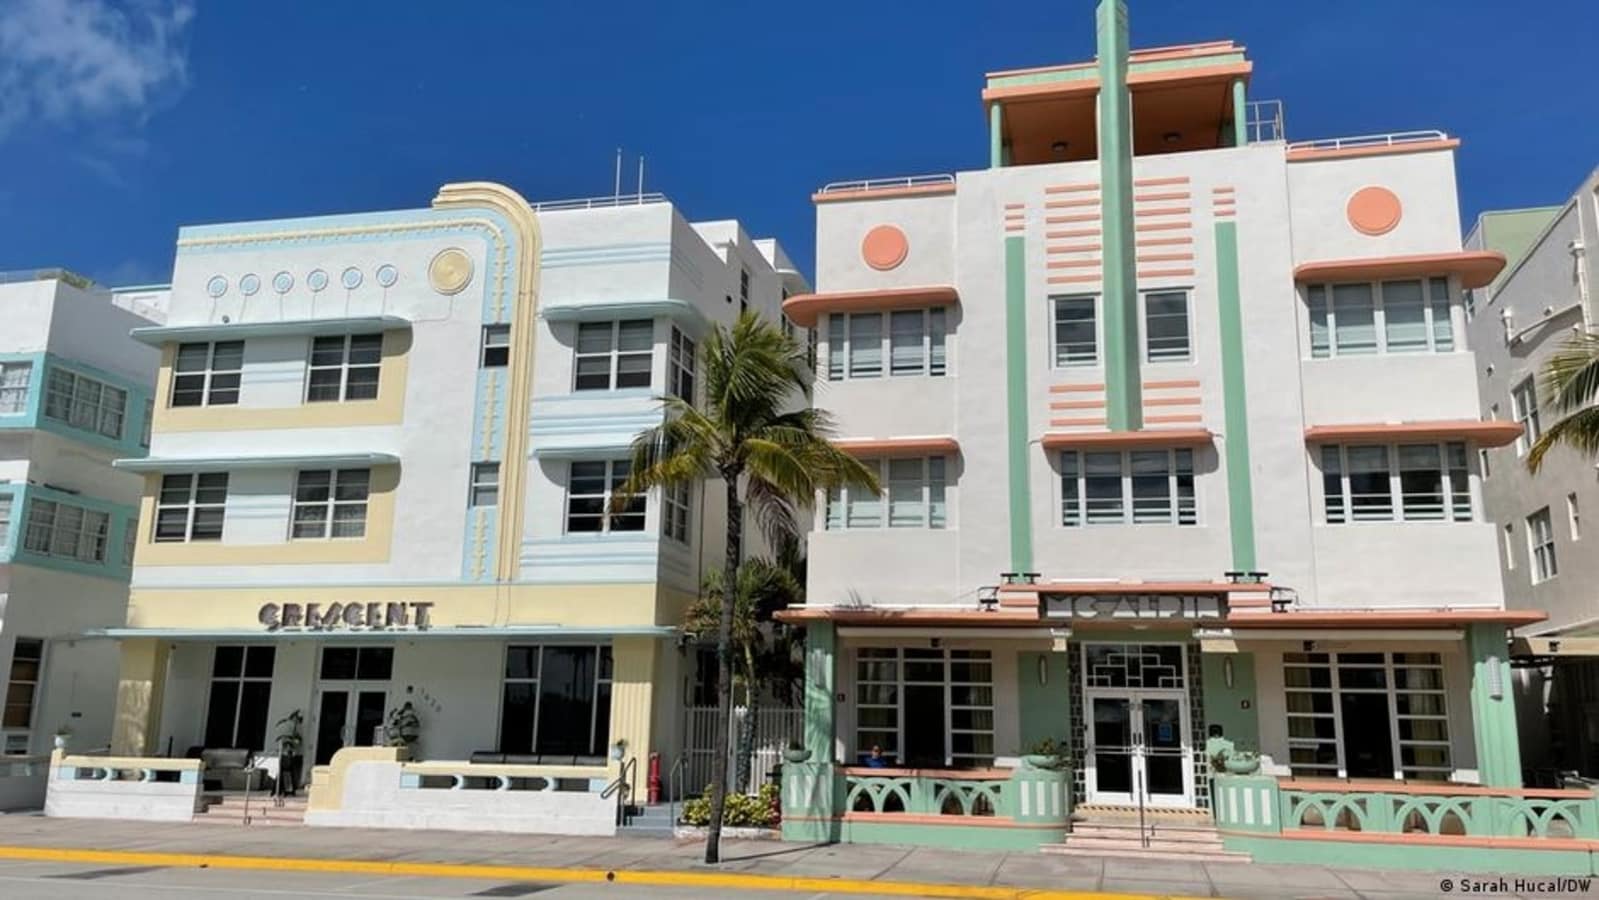 More than just parties: Exploring Miami Beach’s cultural side